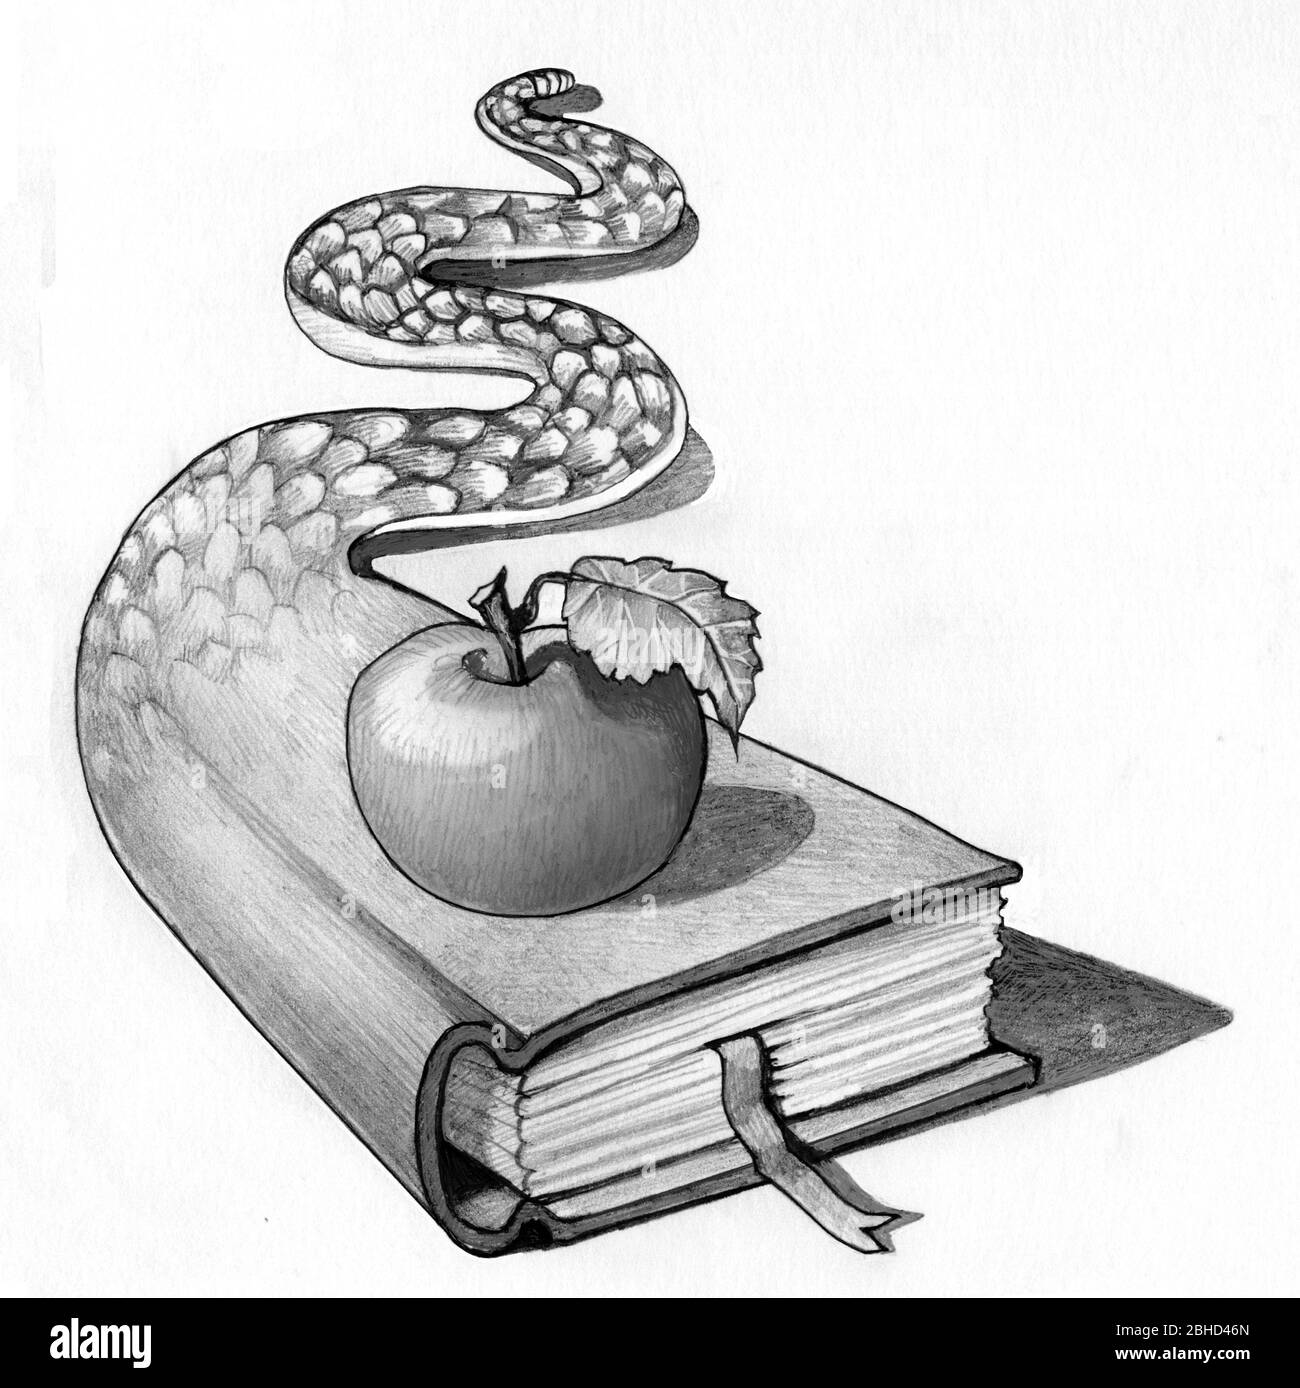 a book turns into a snake on the cover is an Apple metaphor of knowledge and wisdom as original sin Stock Photo